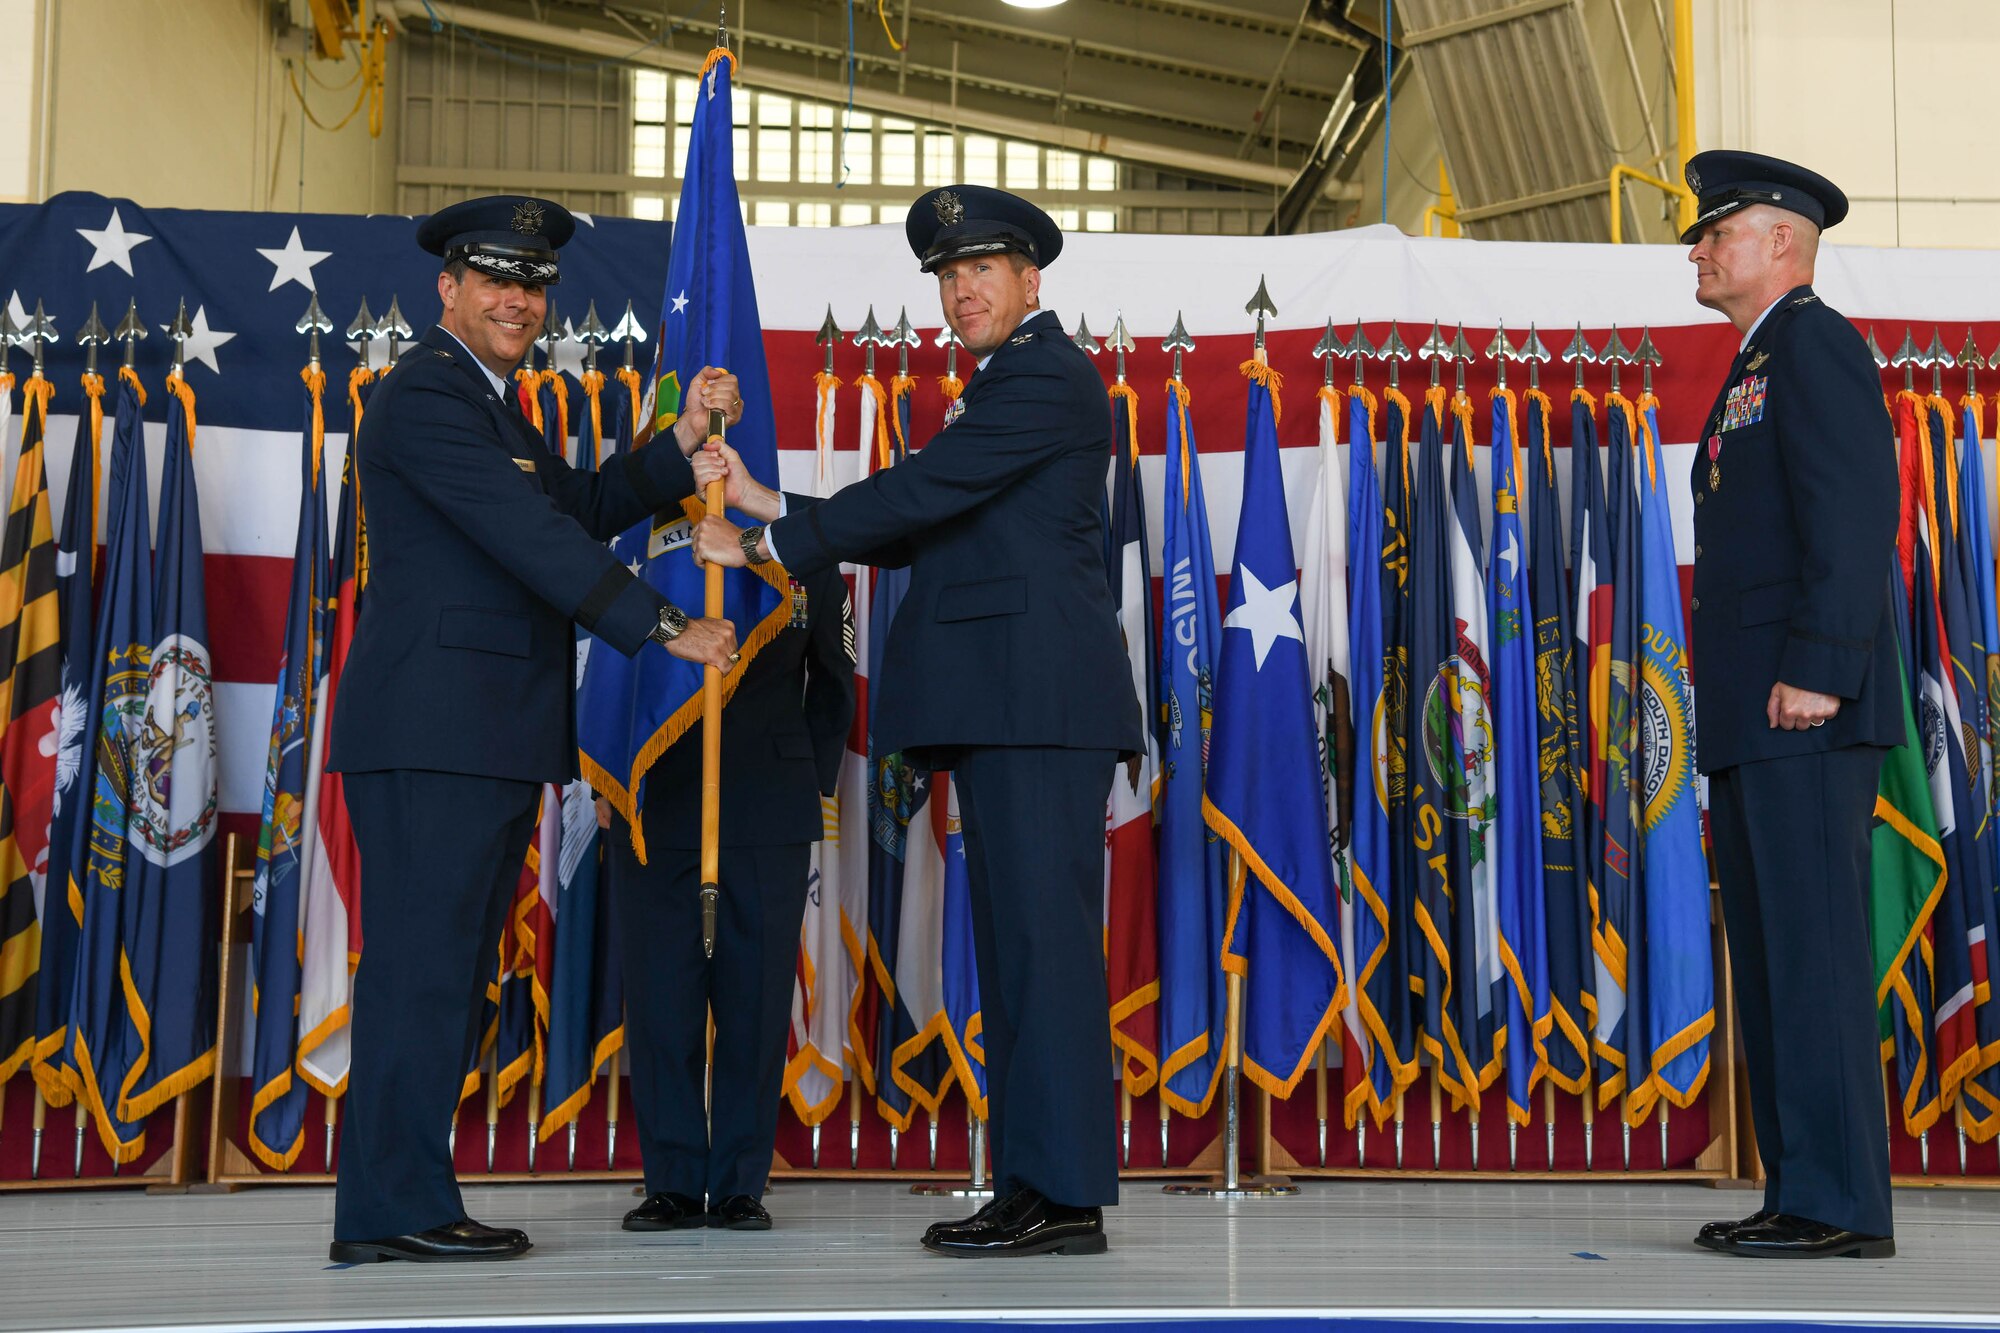 Col. Michael Walters relinquishes command of the 5th Bomb Wing to Col. Daniel Hoadley at Minot Air Force Base, N.D., June 23, 2022.